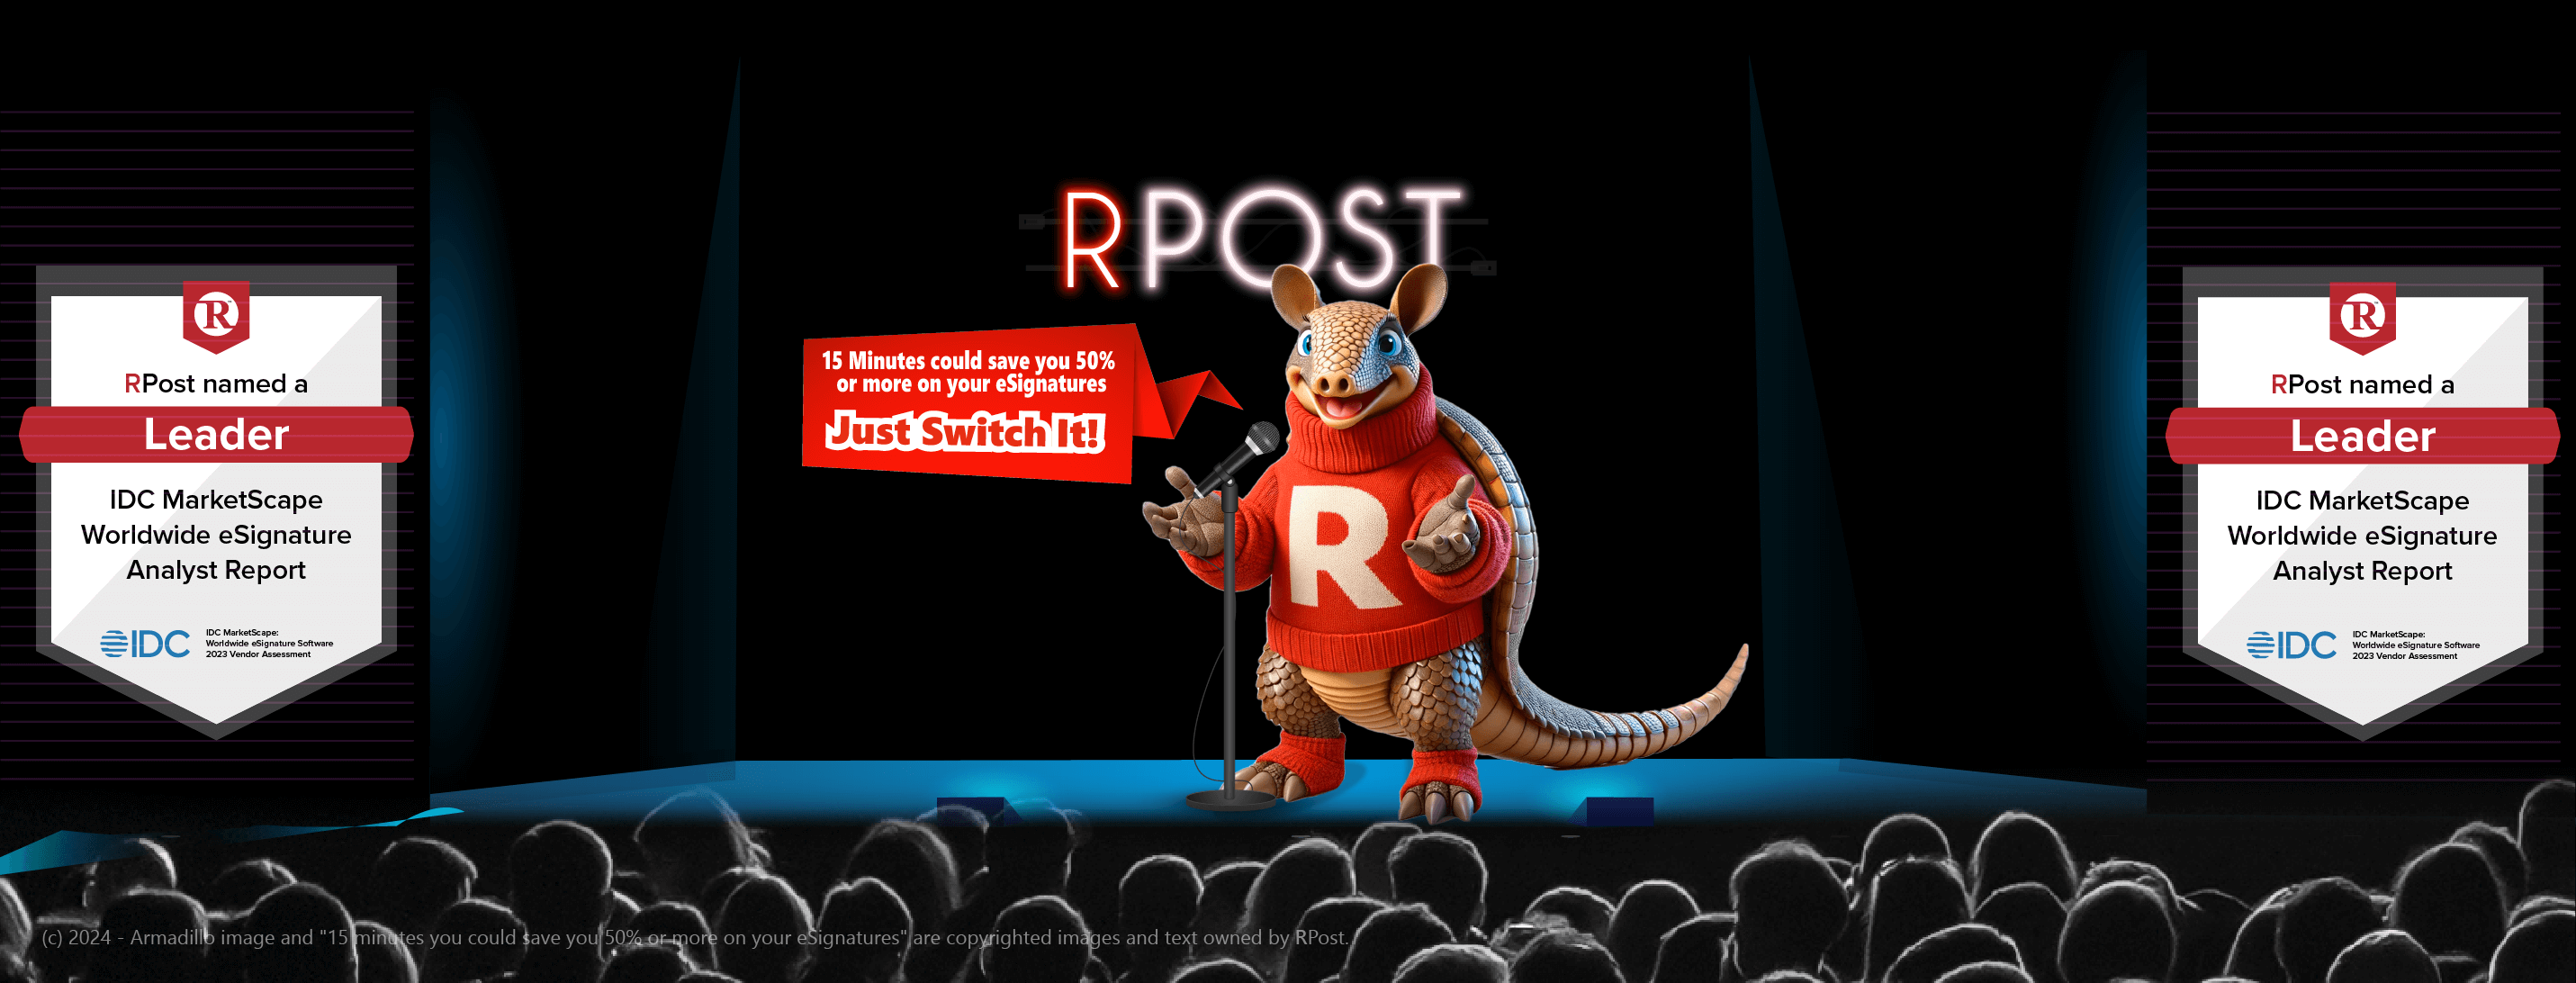 Press Conference – Armand the Armadillo Joins the RPost Team as Product Evangelist